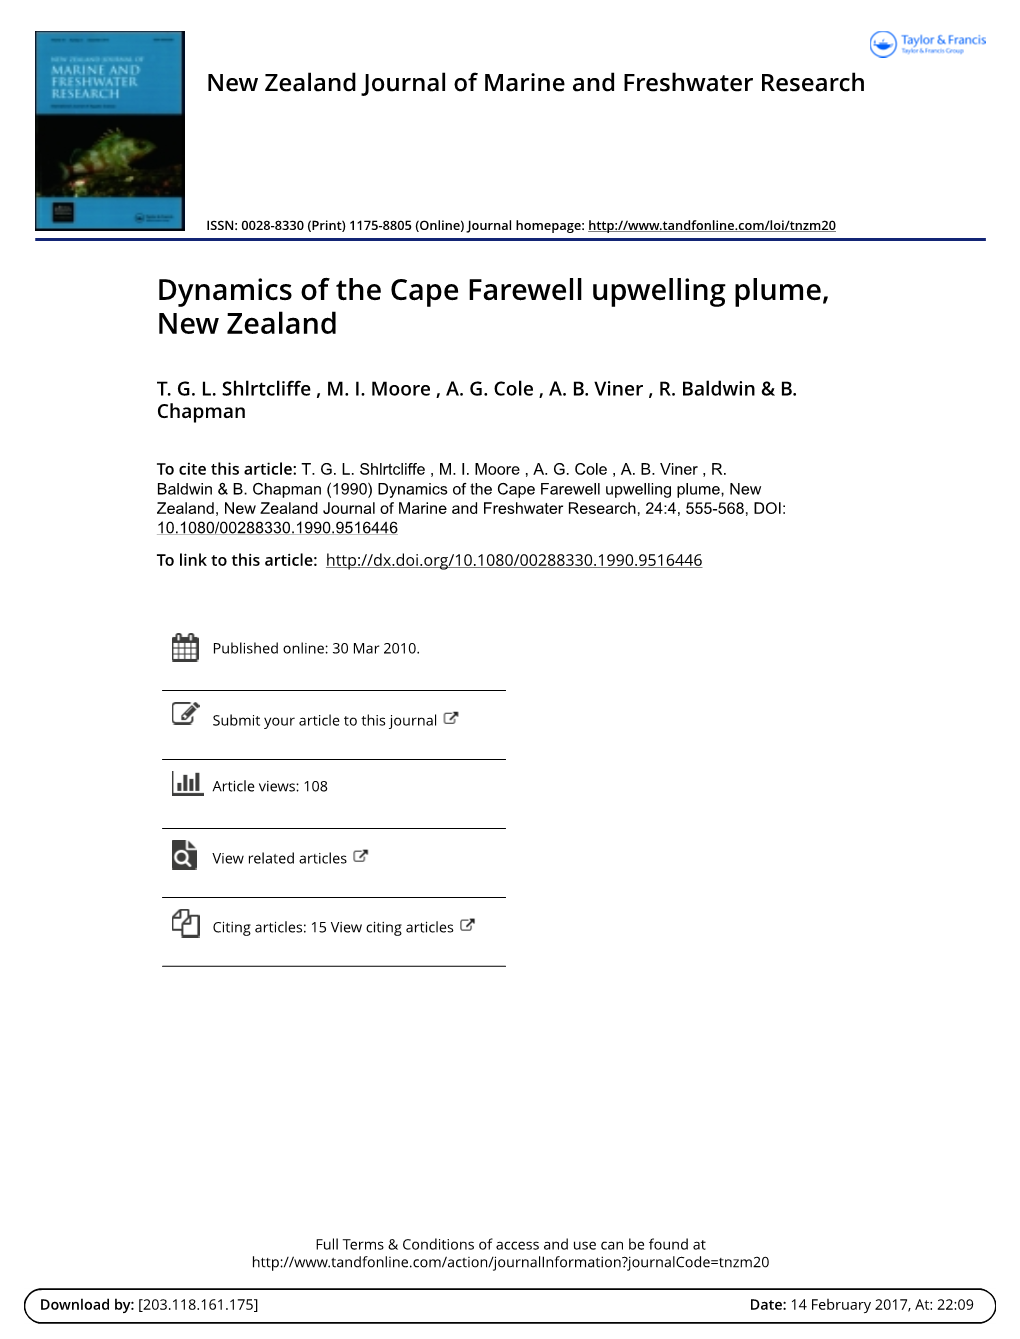 Dynamics of the Cape Farewell Upwelling Plume, New Zealand